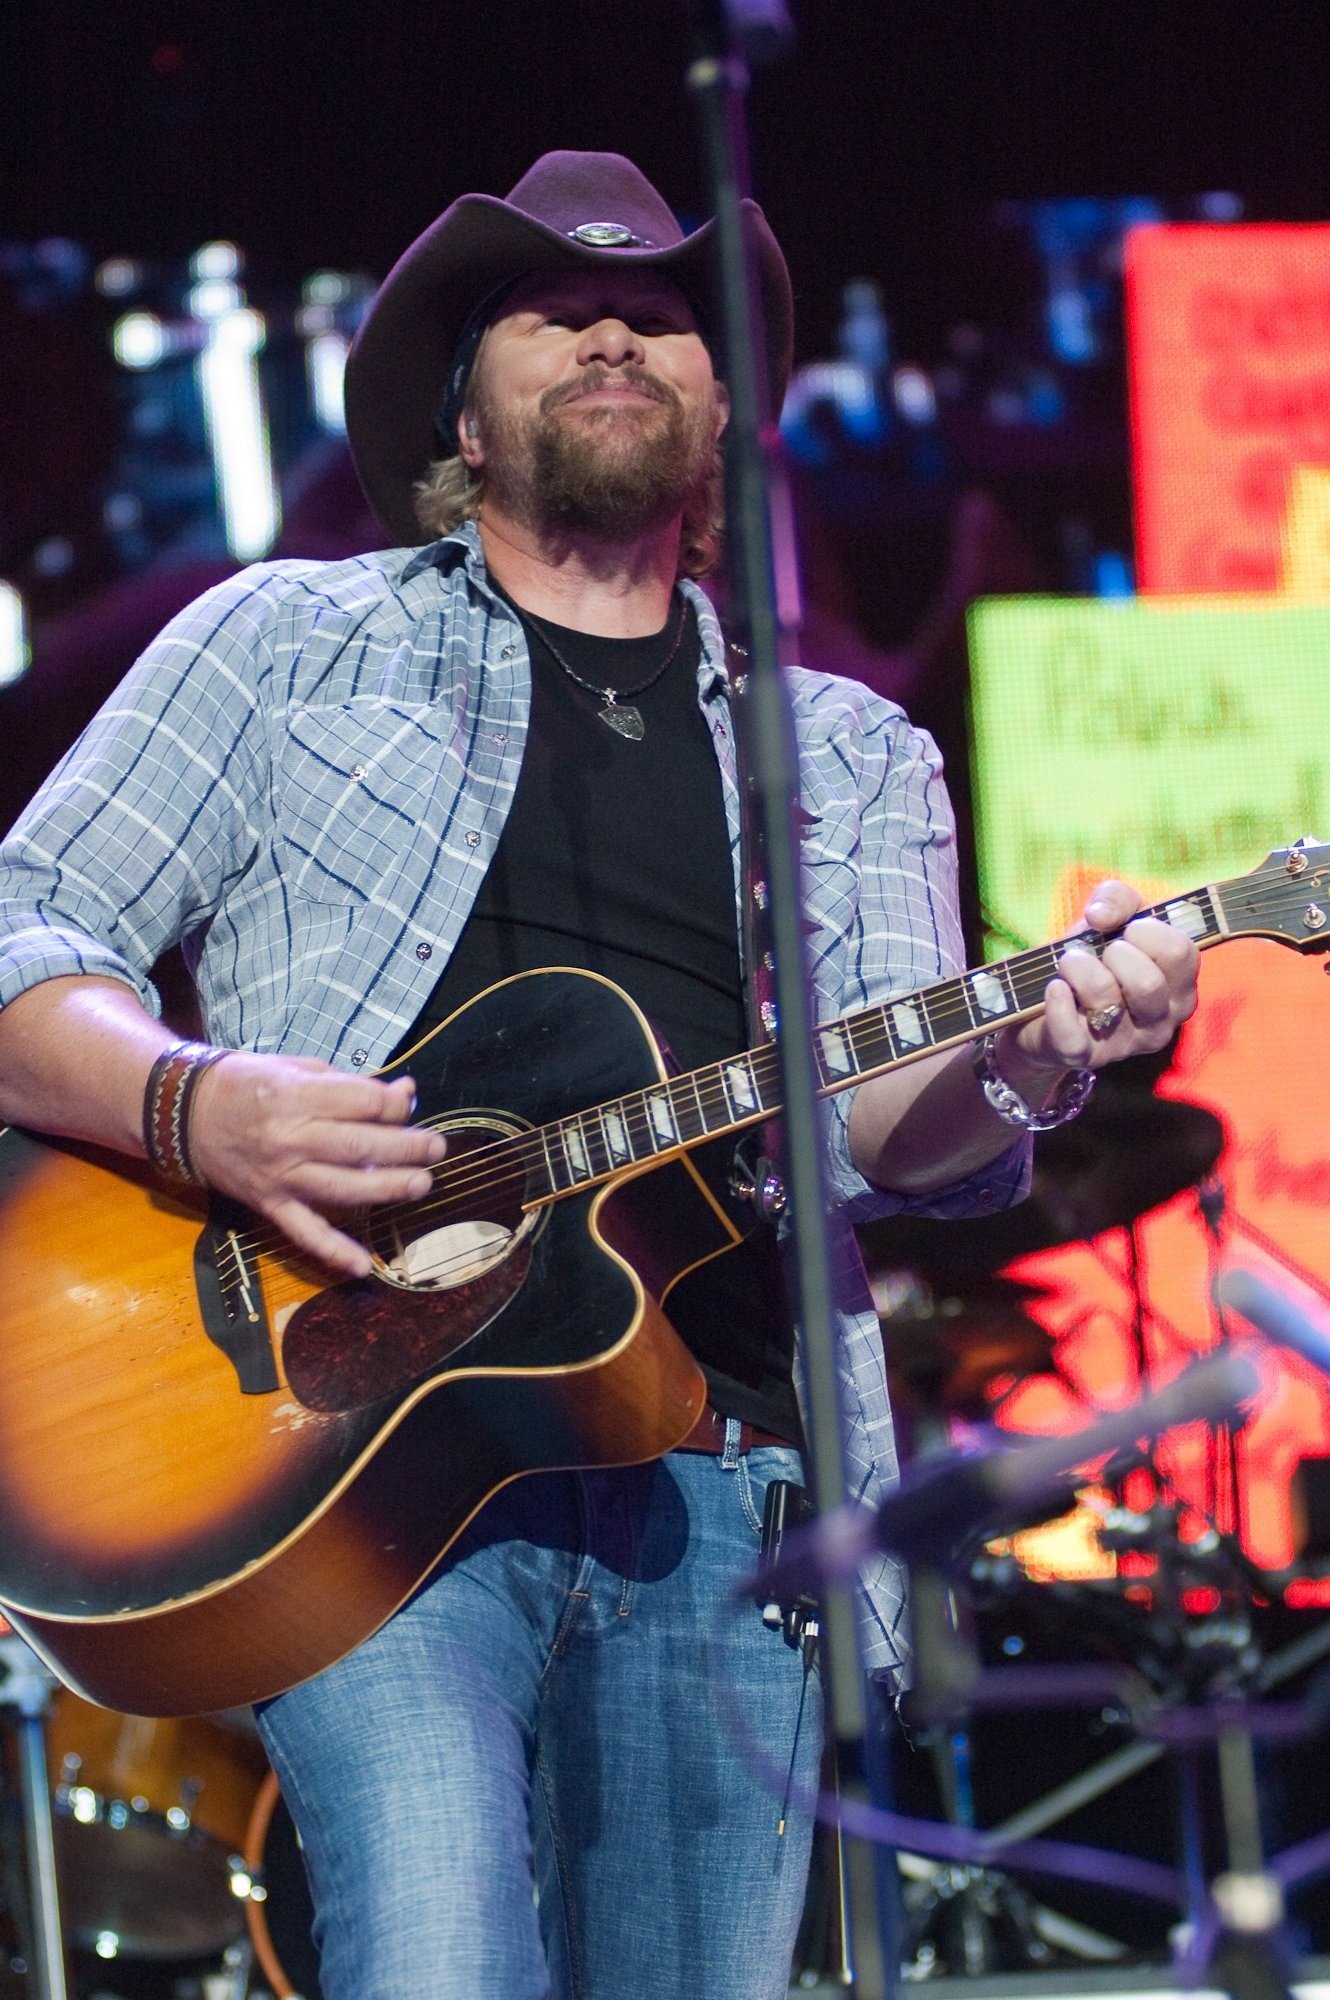 Toby Keith, 3 Doors Down among acts for Trump inauguration concert